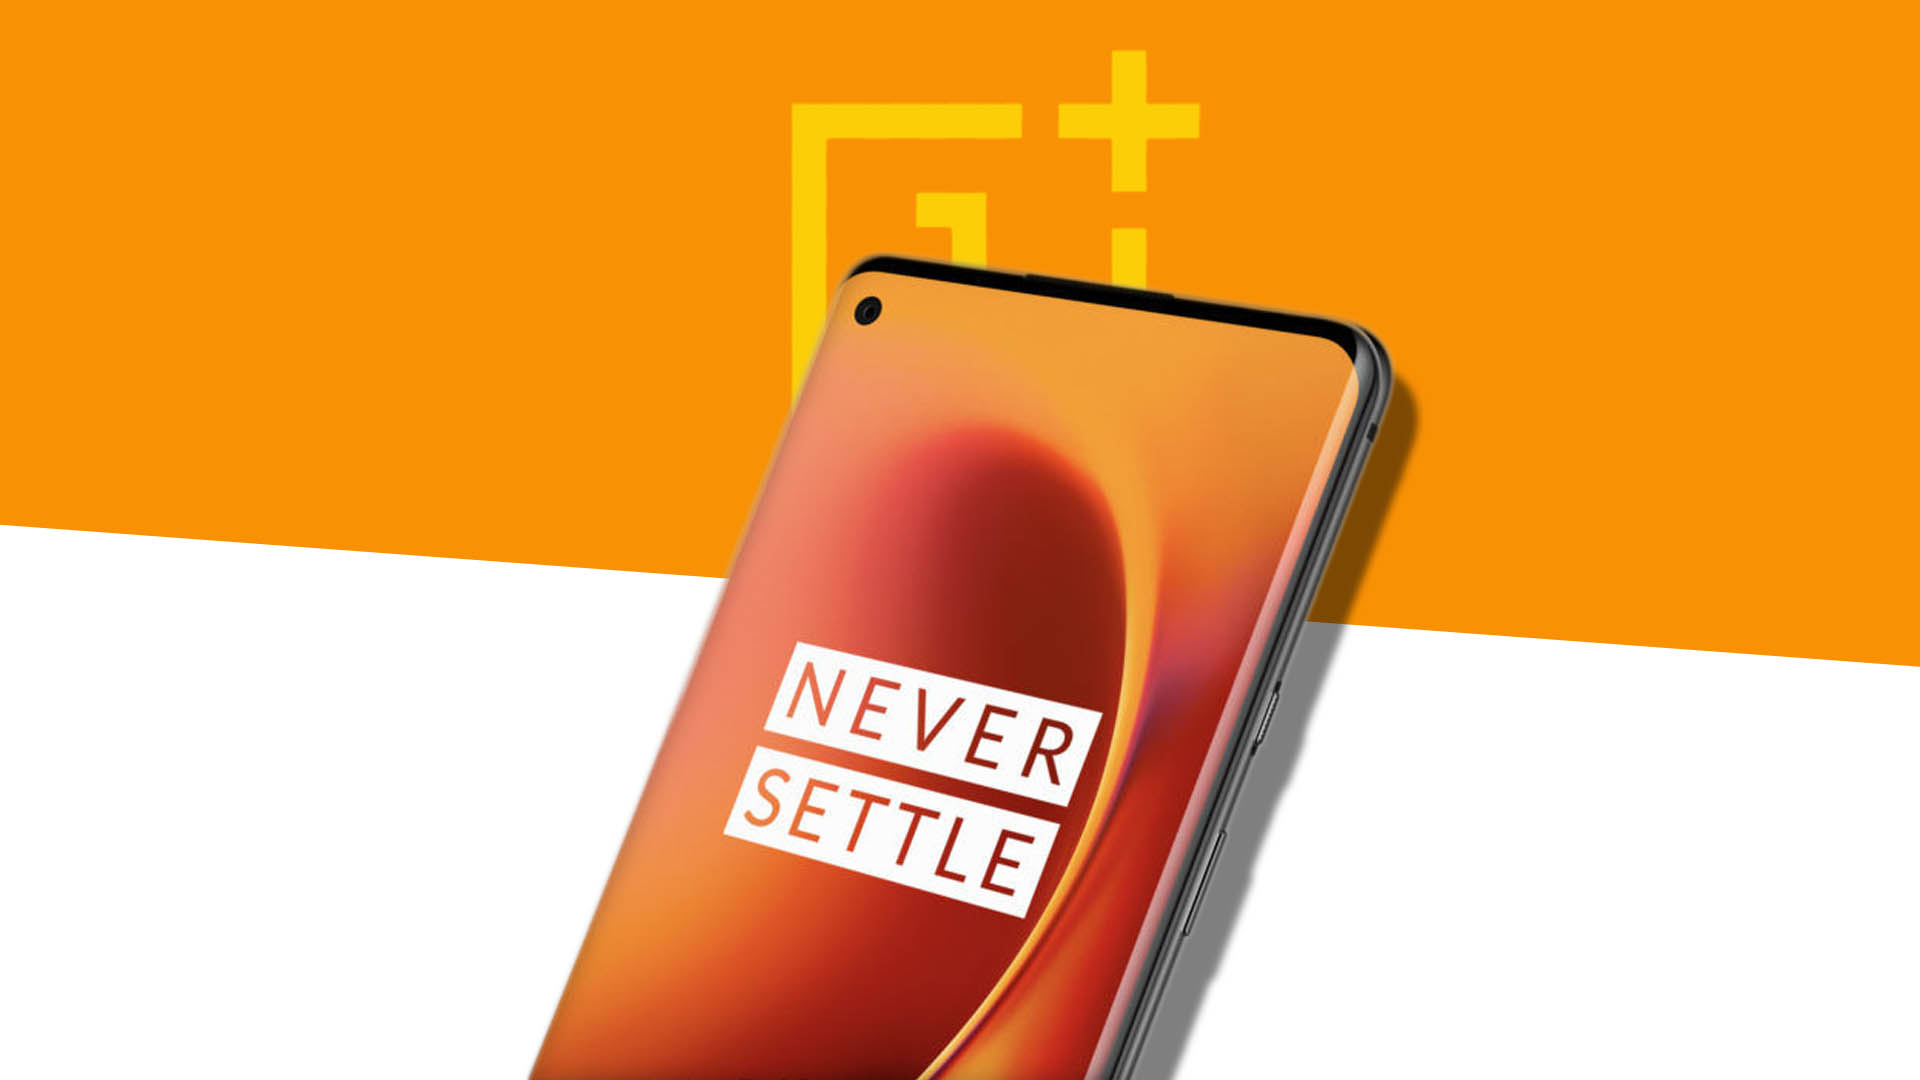 Leaked images show OnePlus 8 model with 120Hz refresh rate